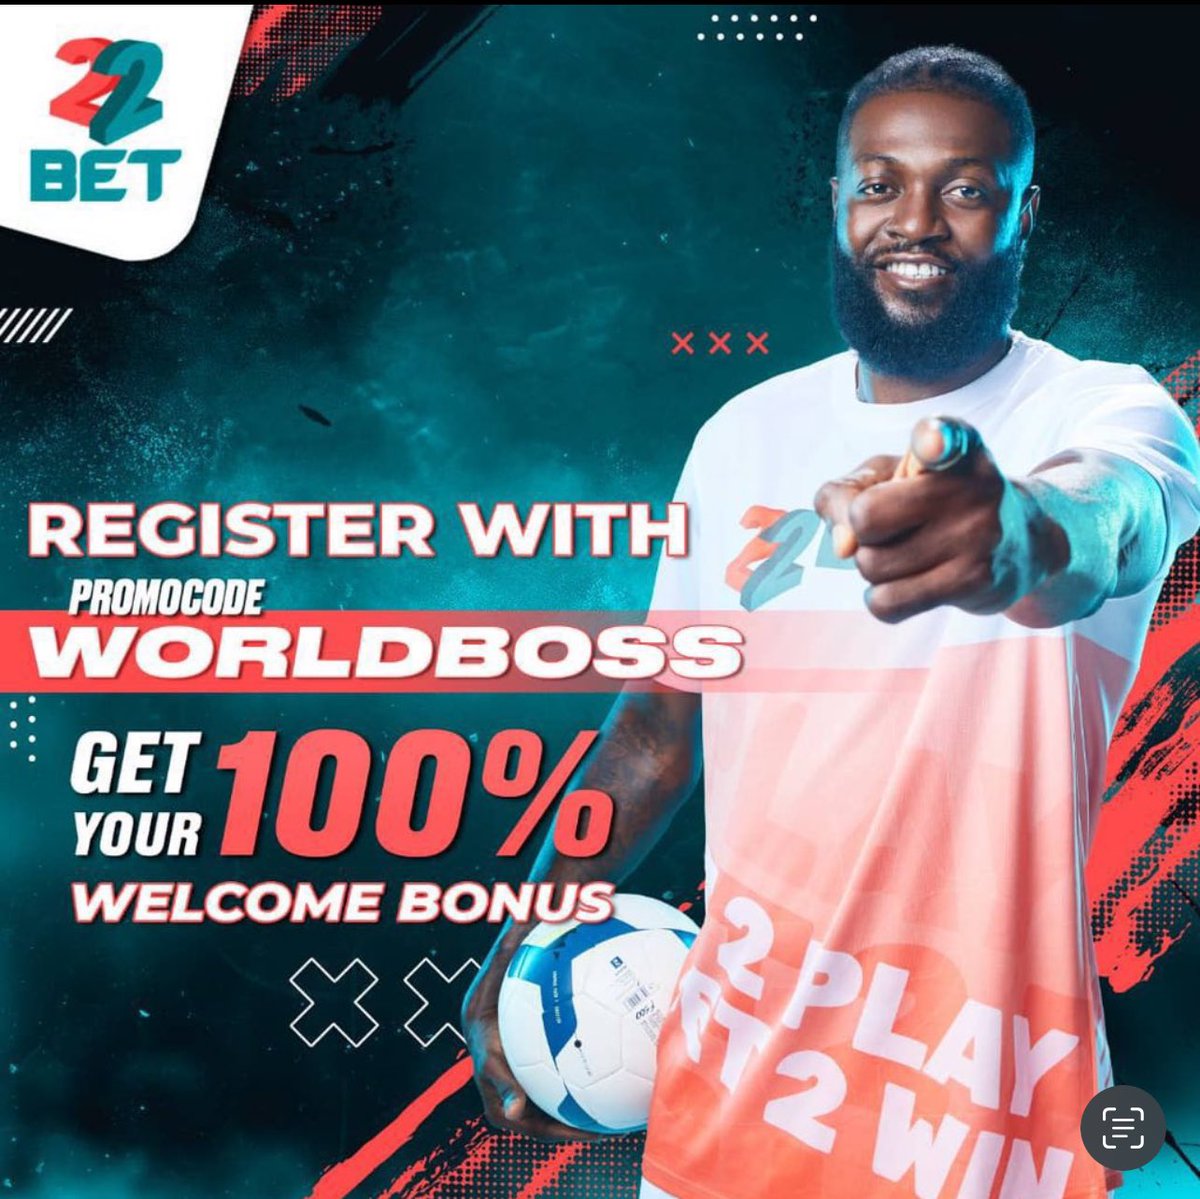 5mins draw on @22bet_official  

5 odd 

Code ⏩ UFXCQ

You don’t have account on 22bet ?

Register here 👉 cutt.ly/swuxHud4

Promo code: WORLDBOSS